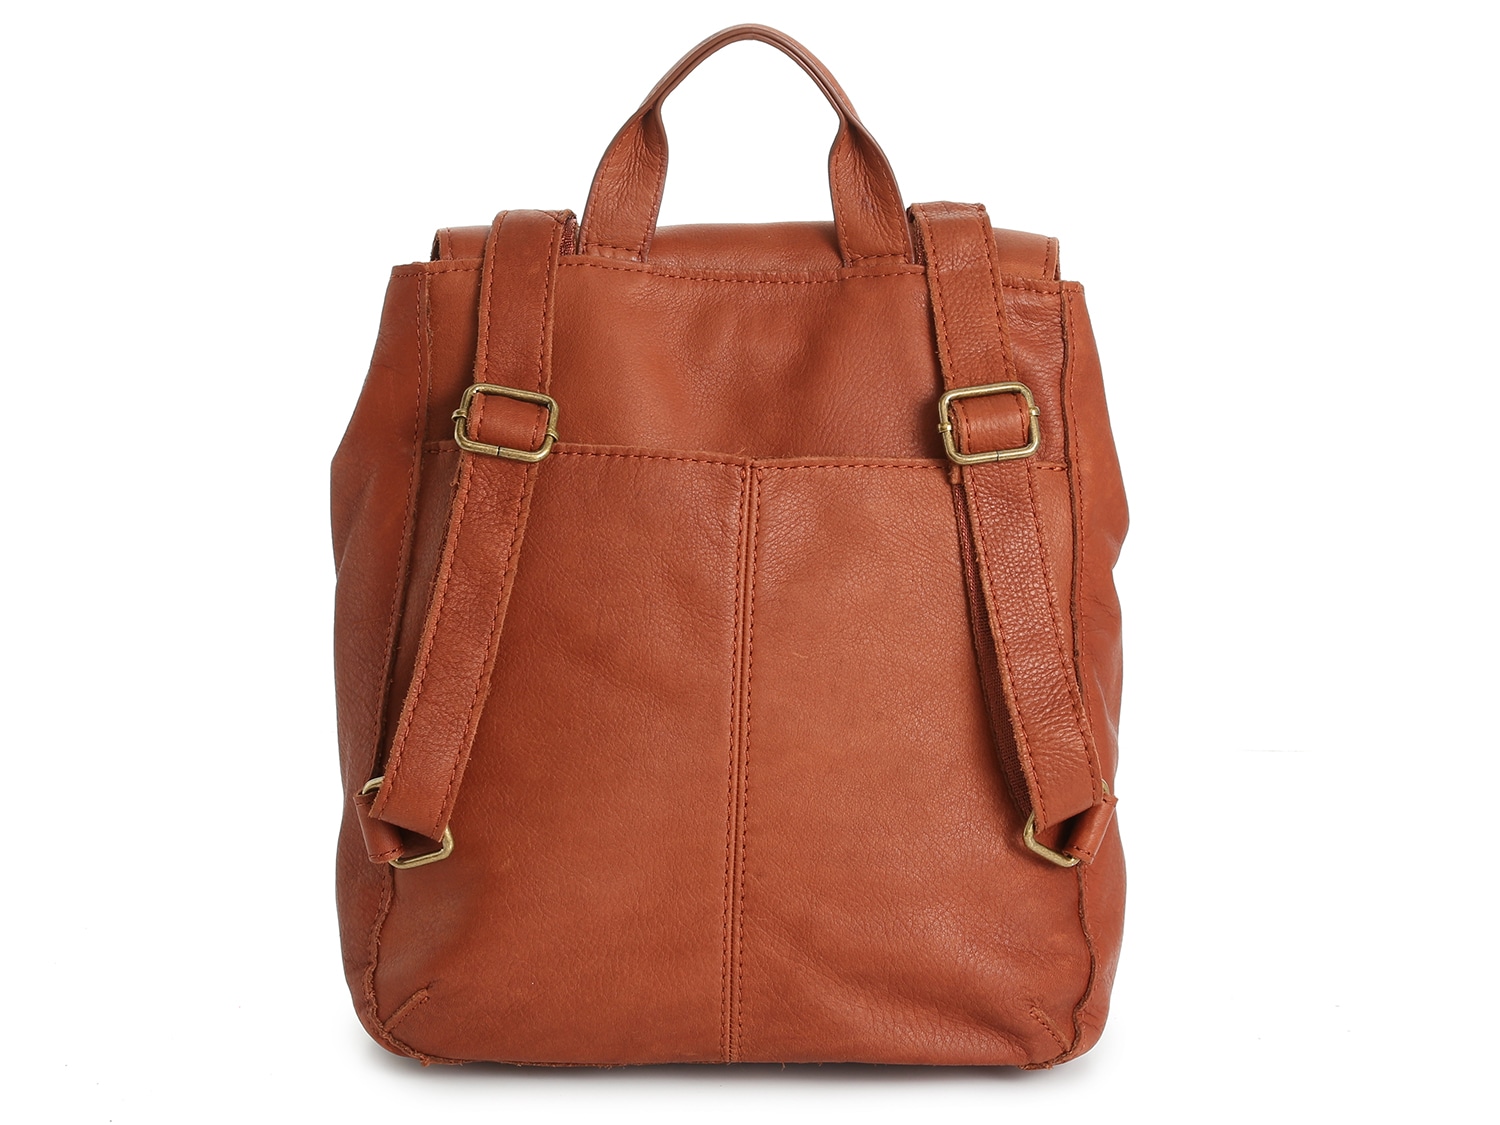 American Leather Co. Leather Backpack Women's Handbags & Accessories | DSW